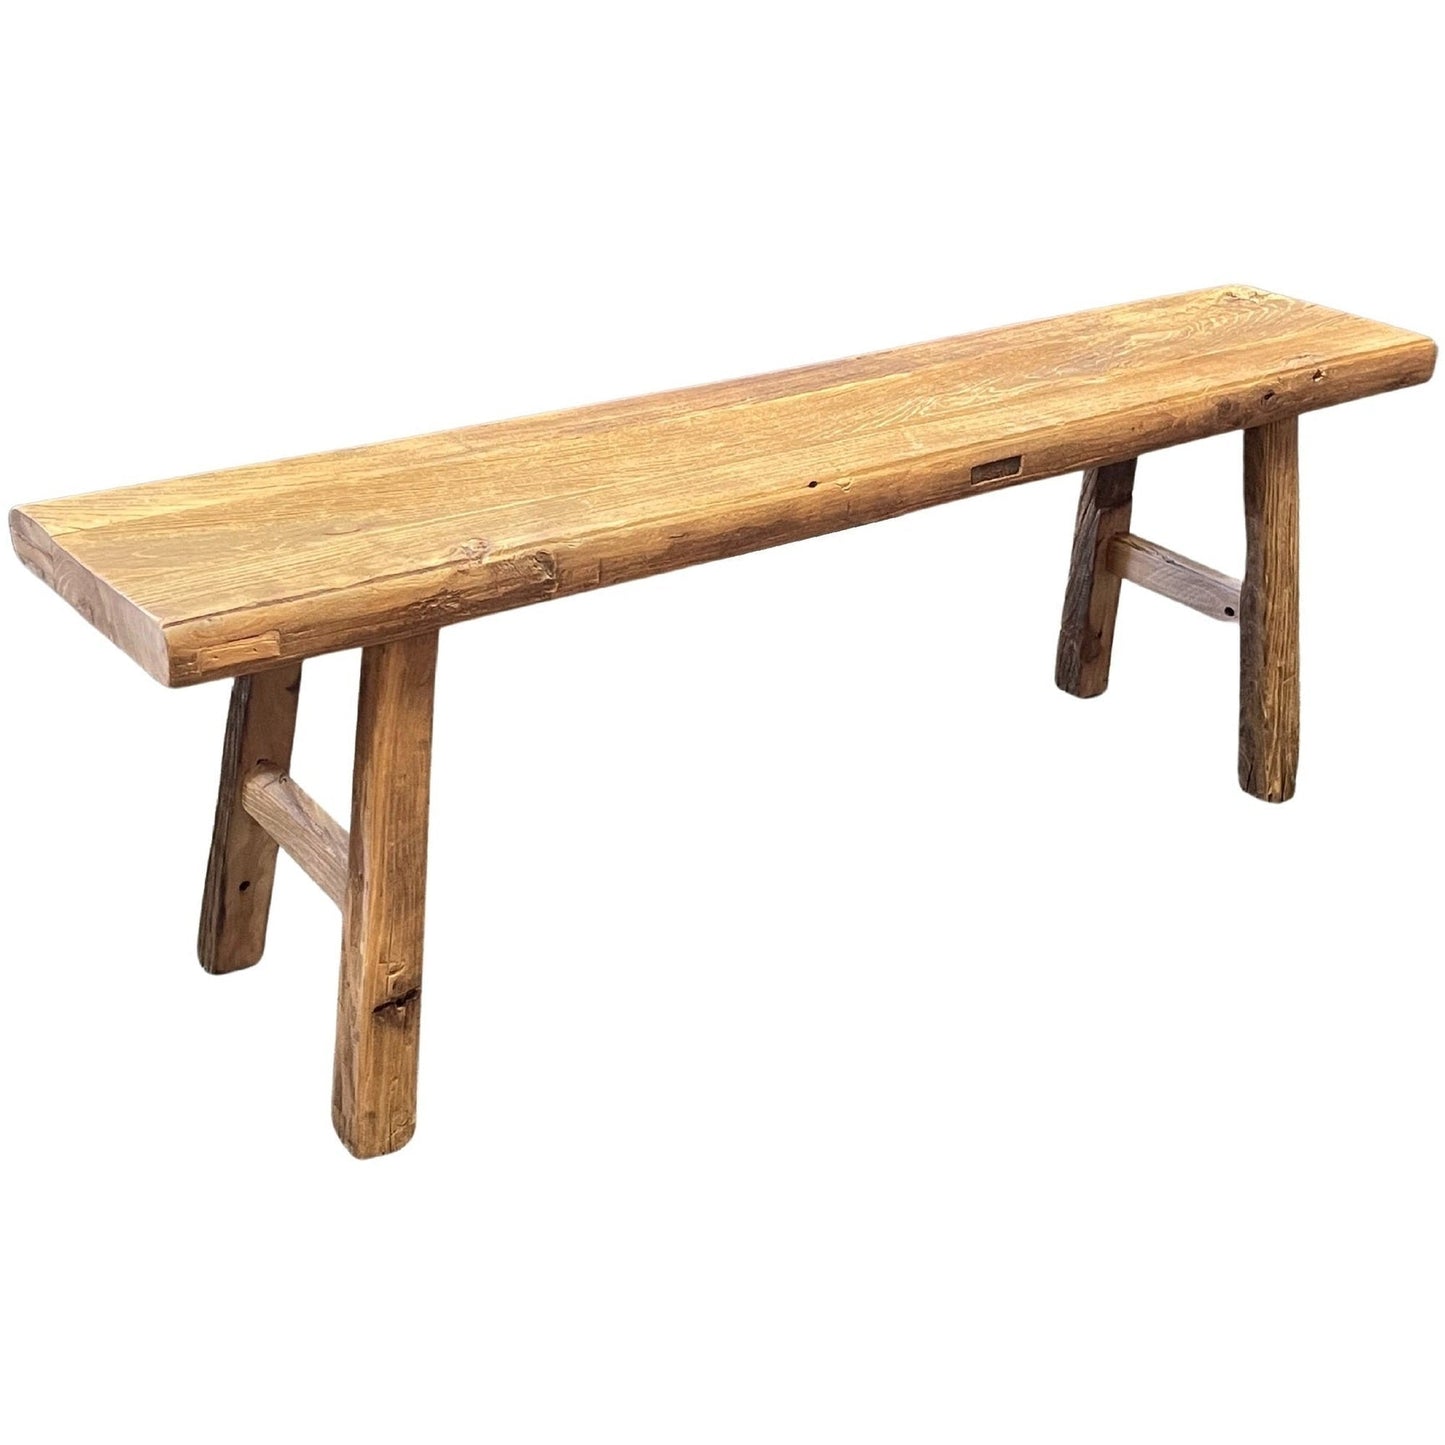 Wooden Bench 59 in, Natural Recyled Elmwood